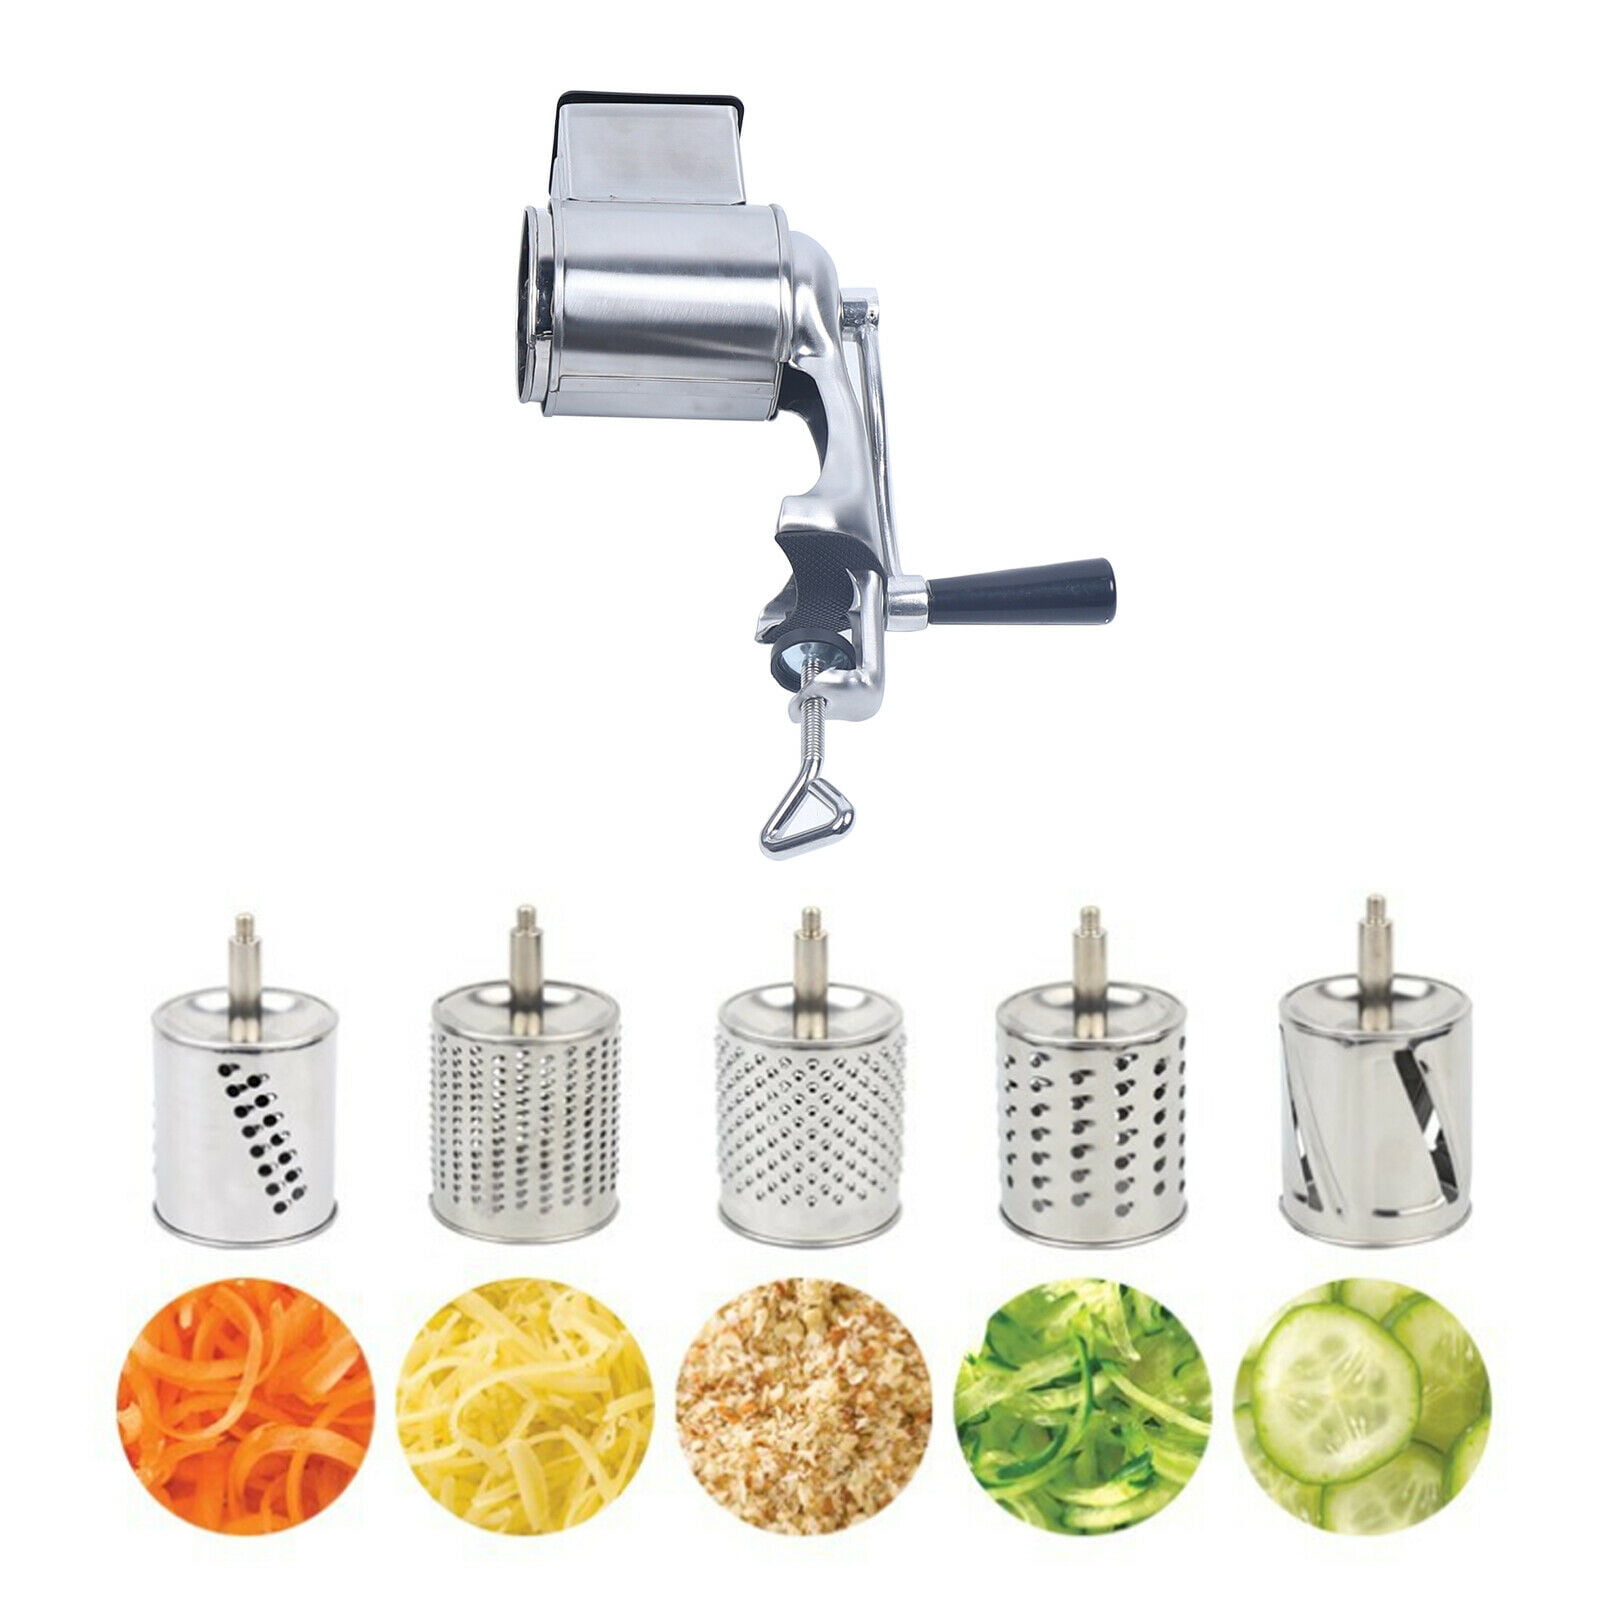 Big 12 800W Single-phase cheese grater with reverse function